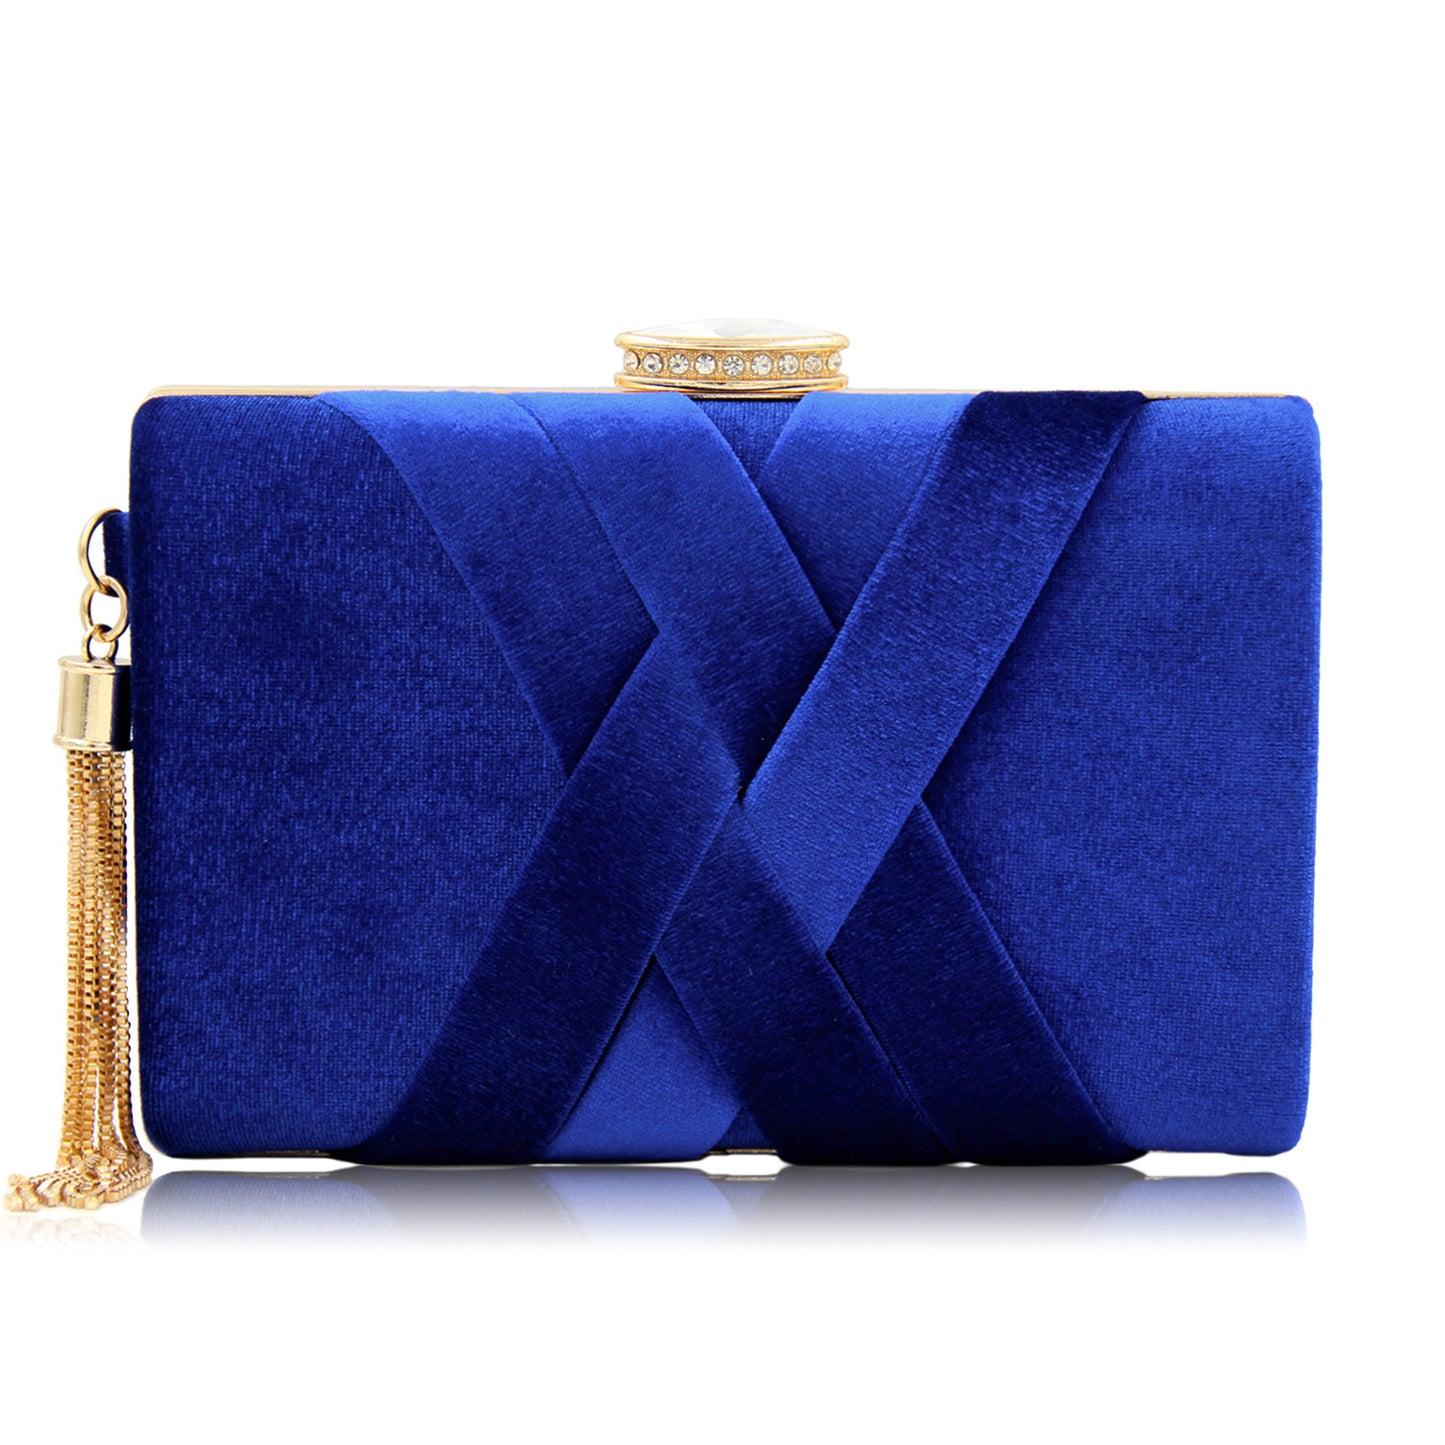 Milisente 2021 New Arrival Women Clutch Bags Top Quality Suede Clutches Purses Ladies Tassels Evening Bag Wedding Clutches